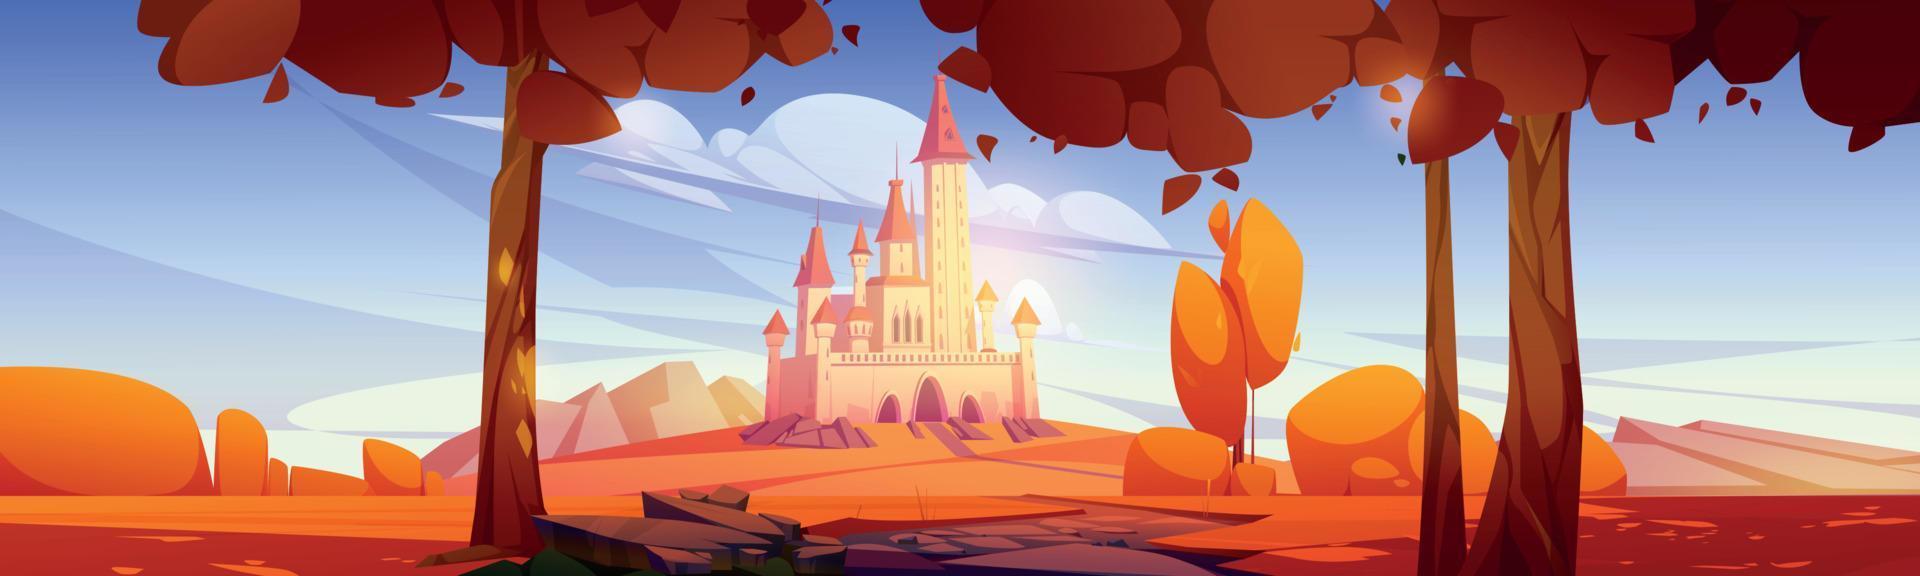 Autumn landscape with road to castle on hill vector